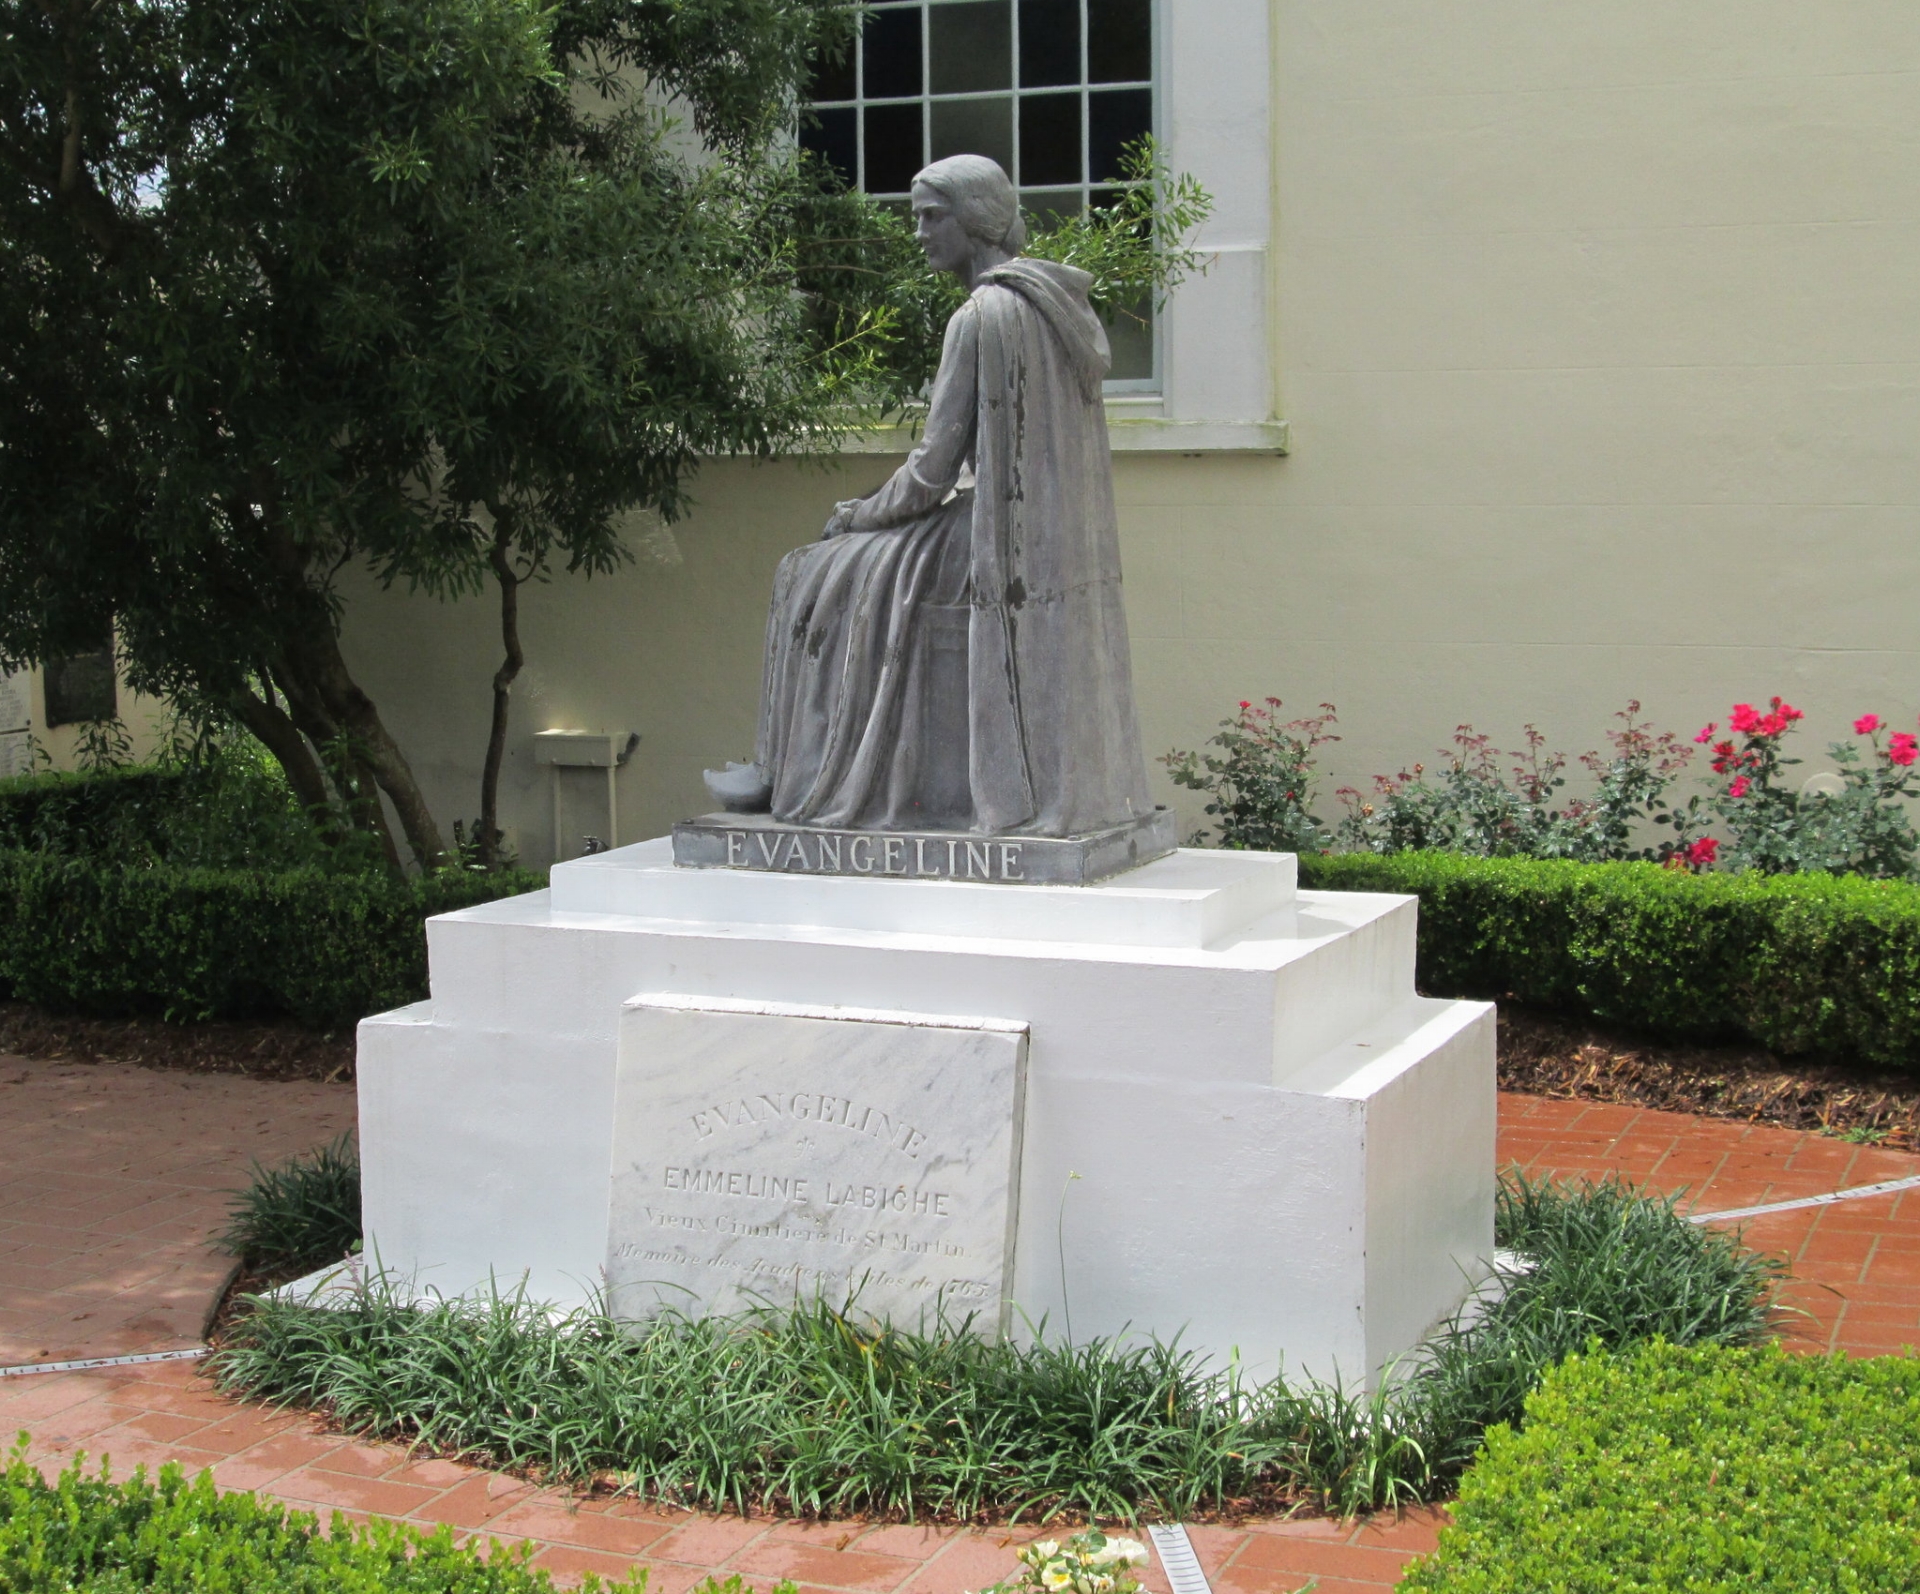  A statue of Evangeline 